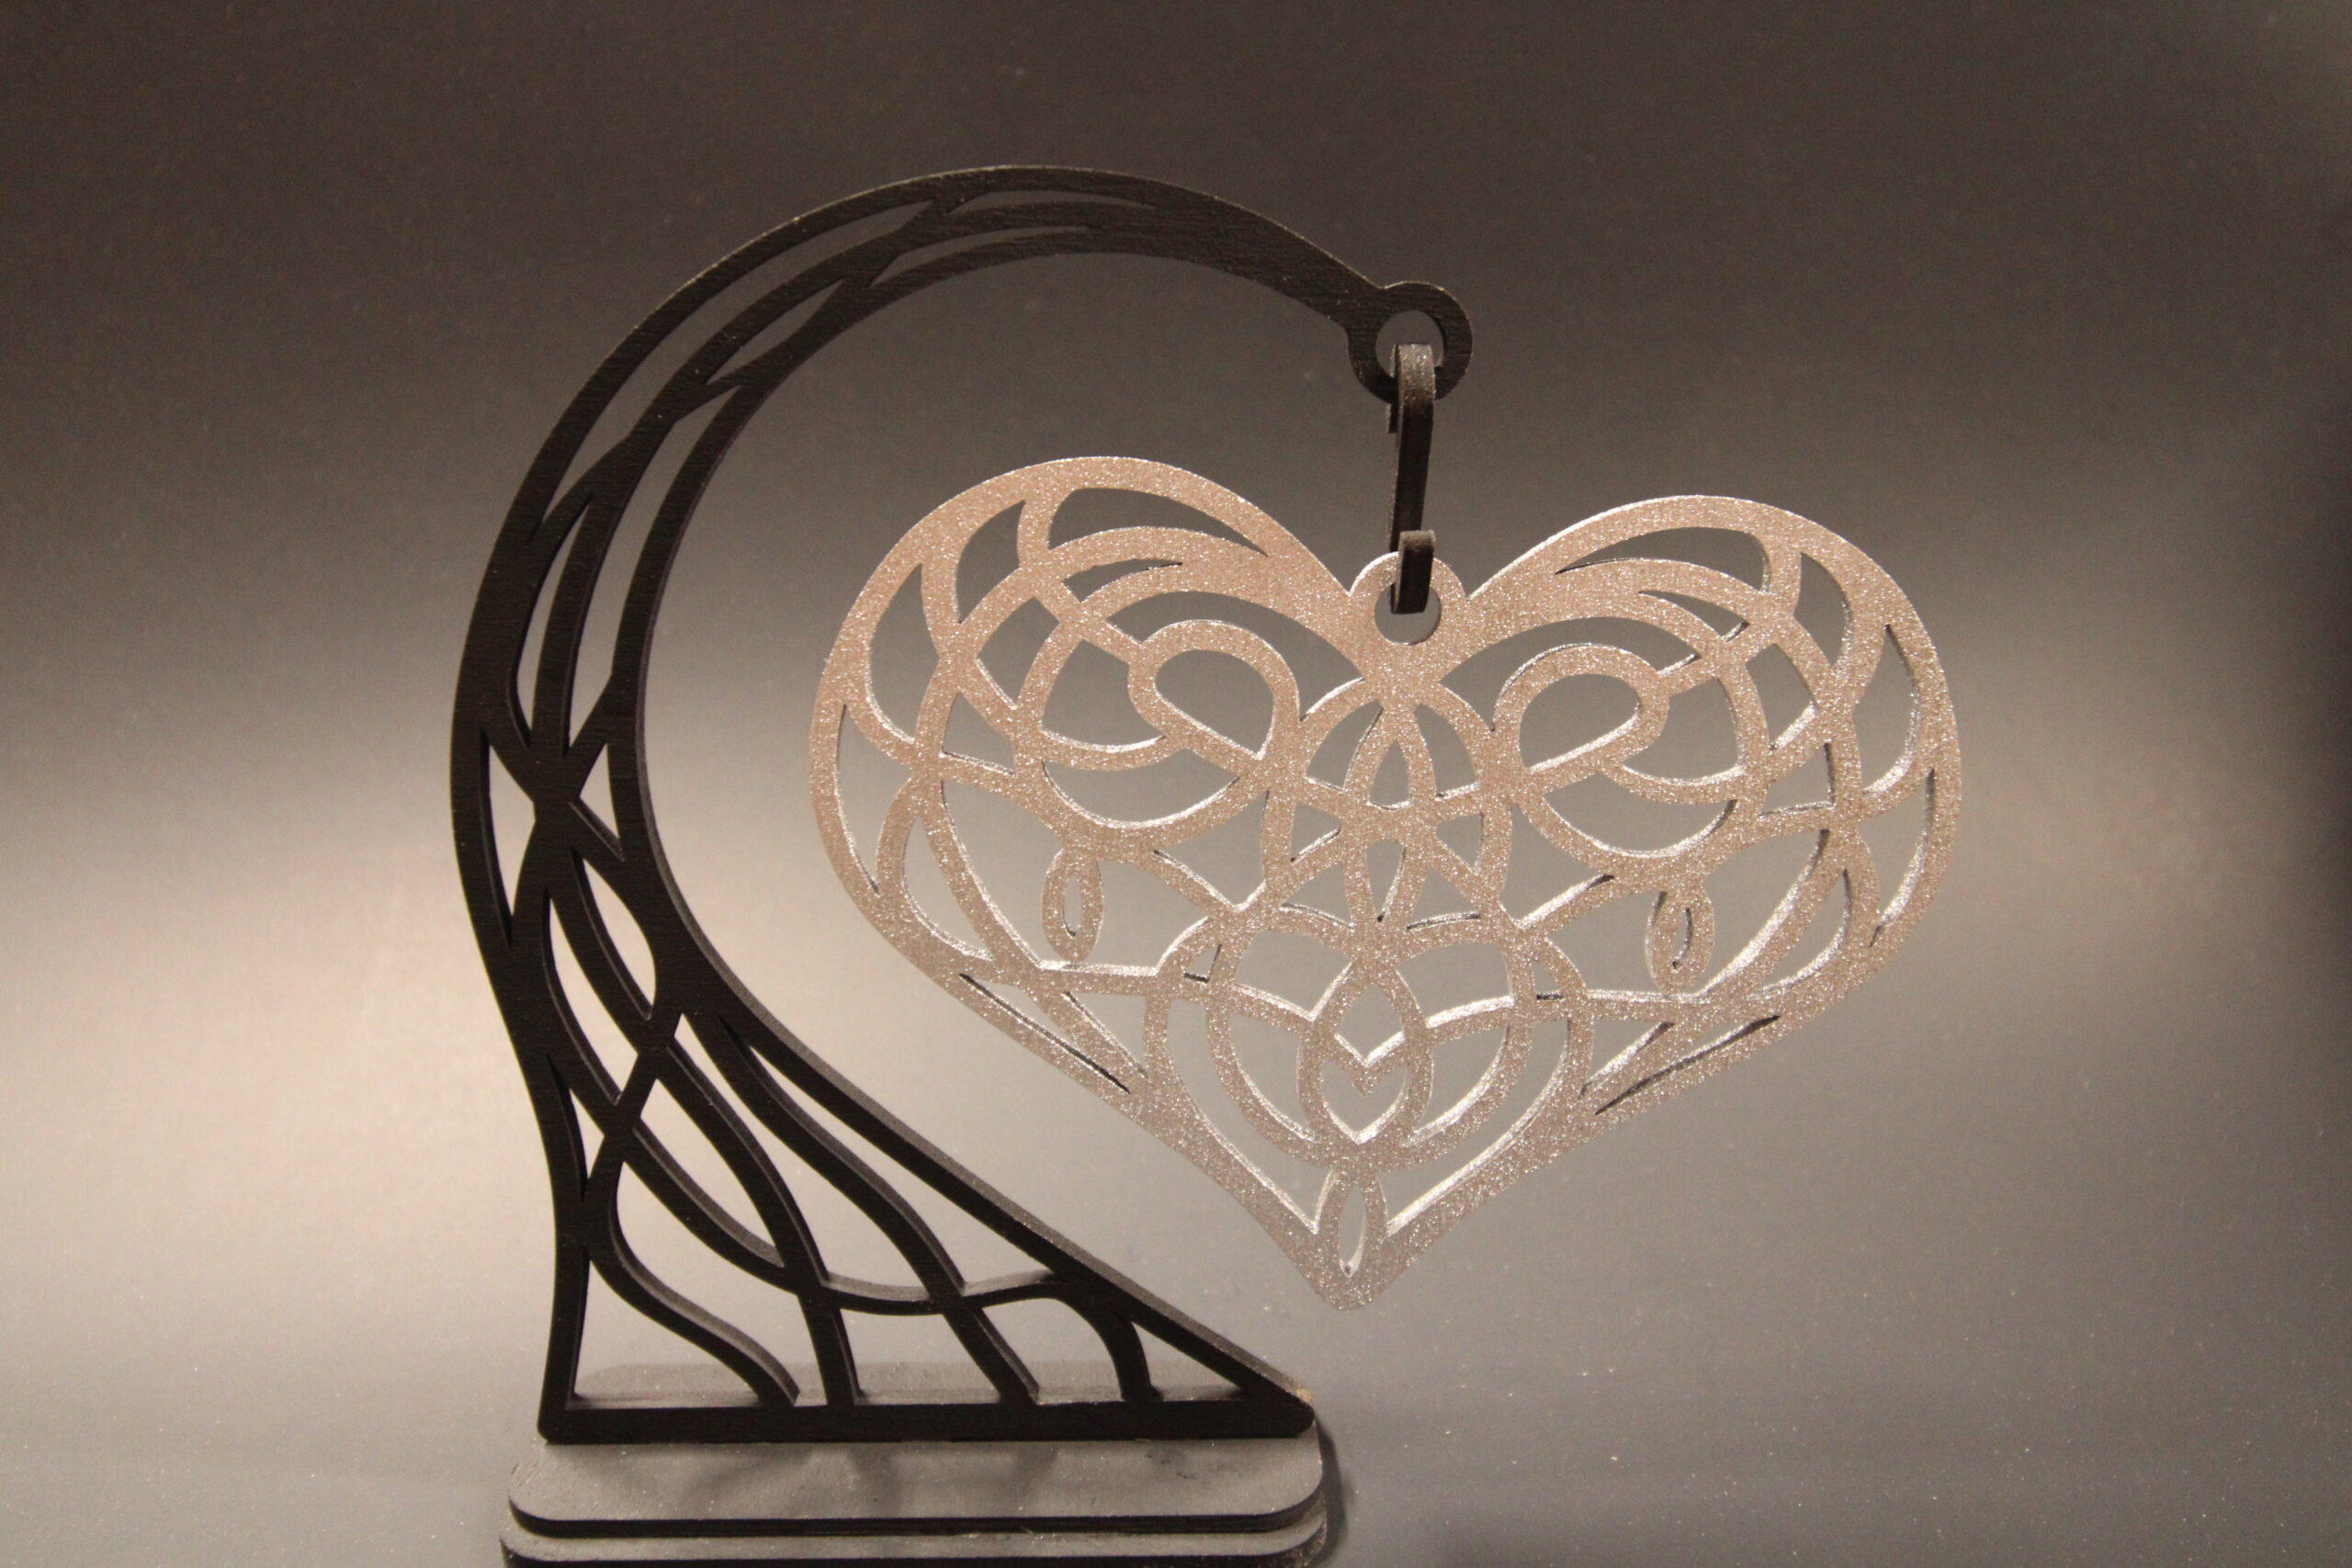 Custom laser cut silver heart for Valentine’s Day gift.